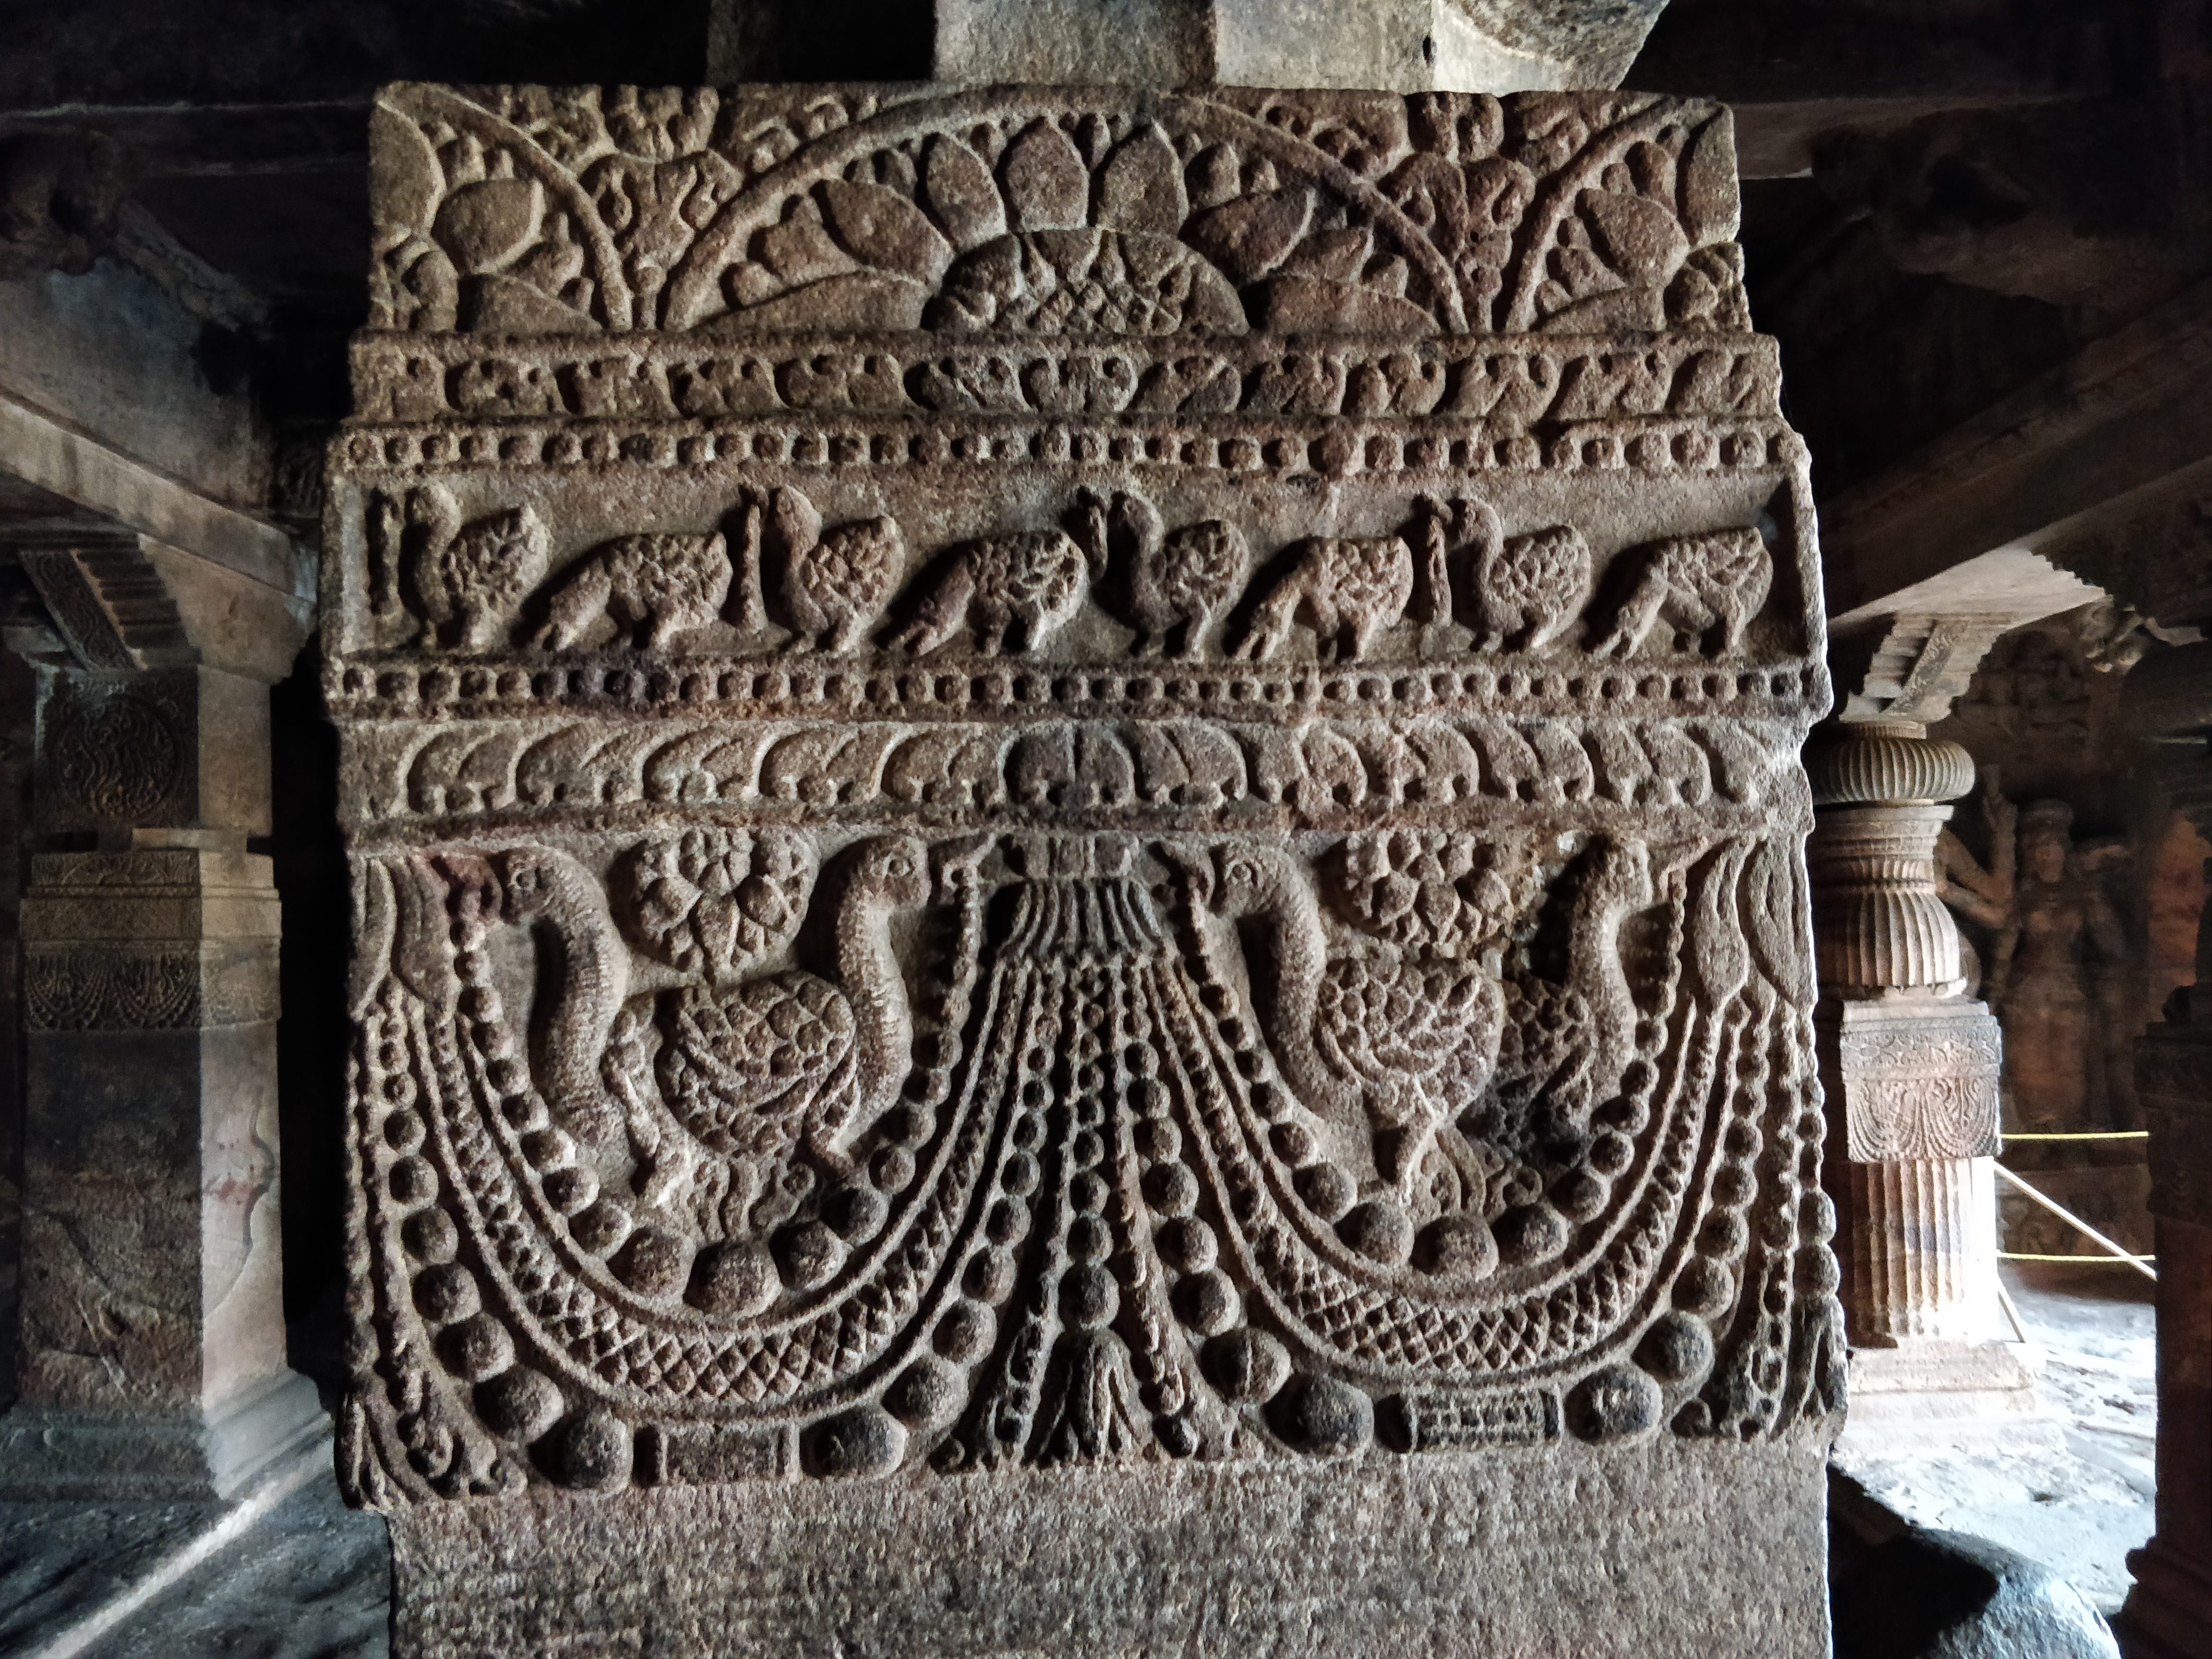 closeup of the carvings on the pillars